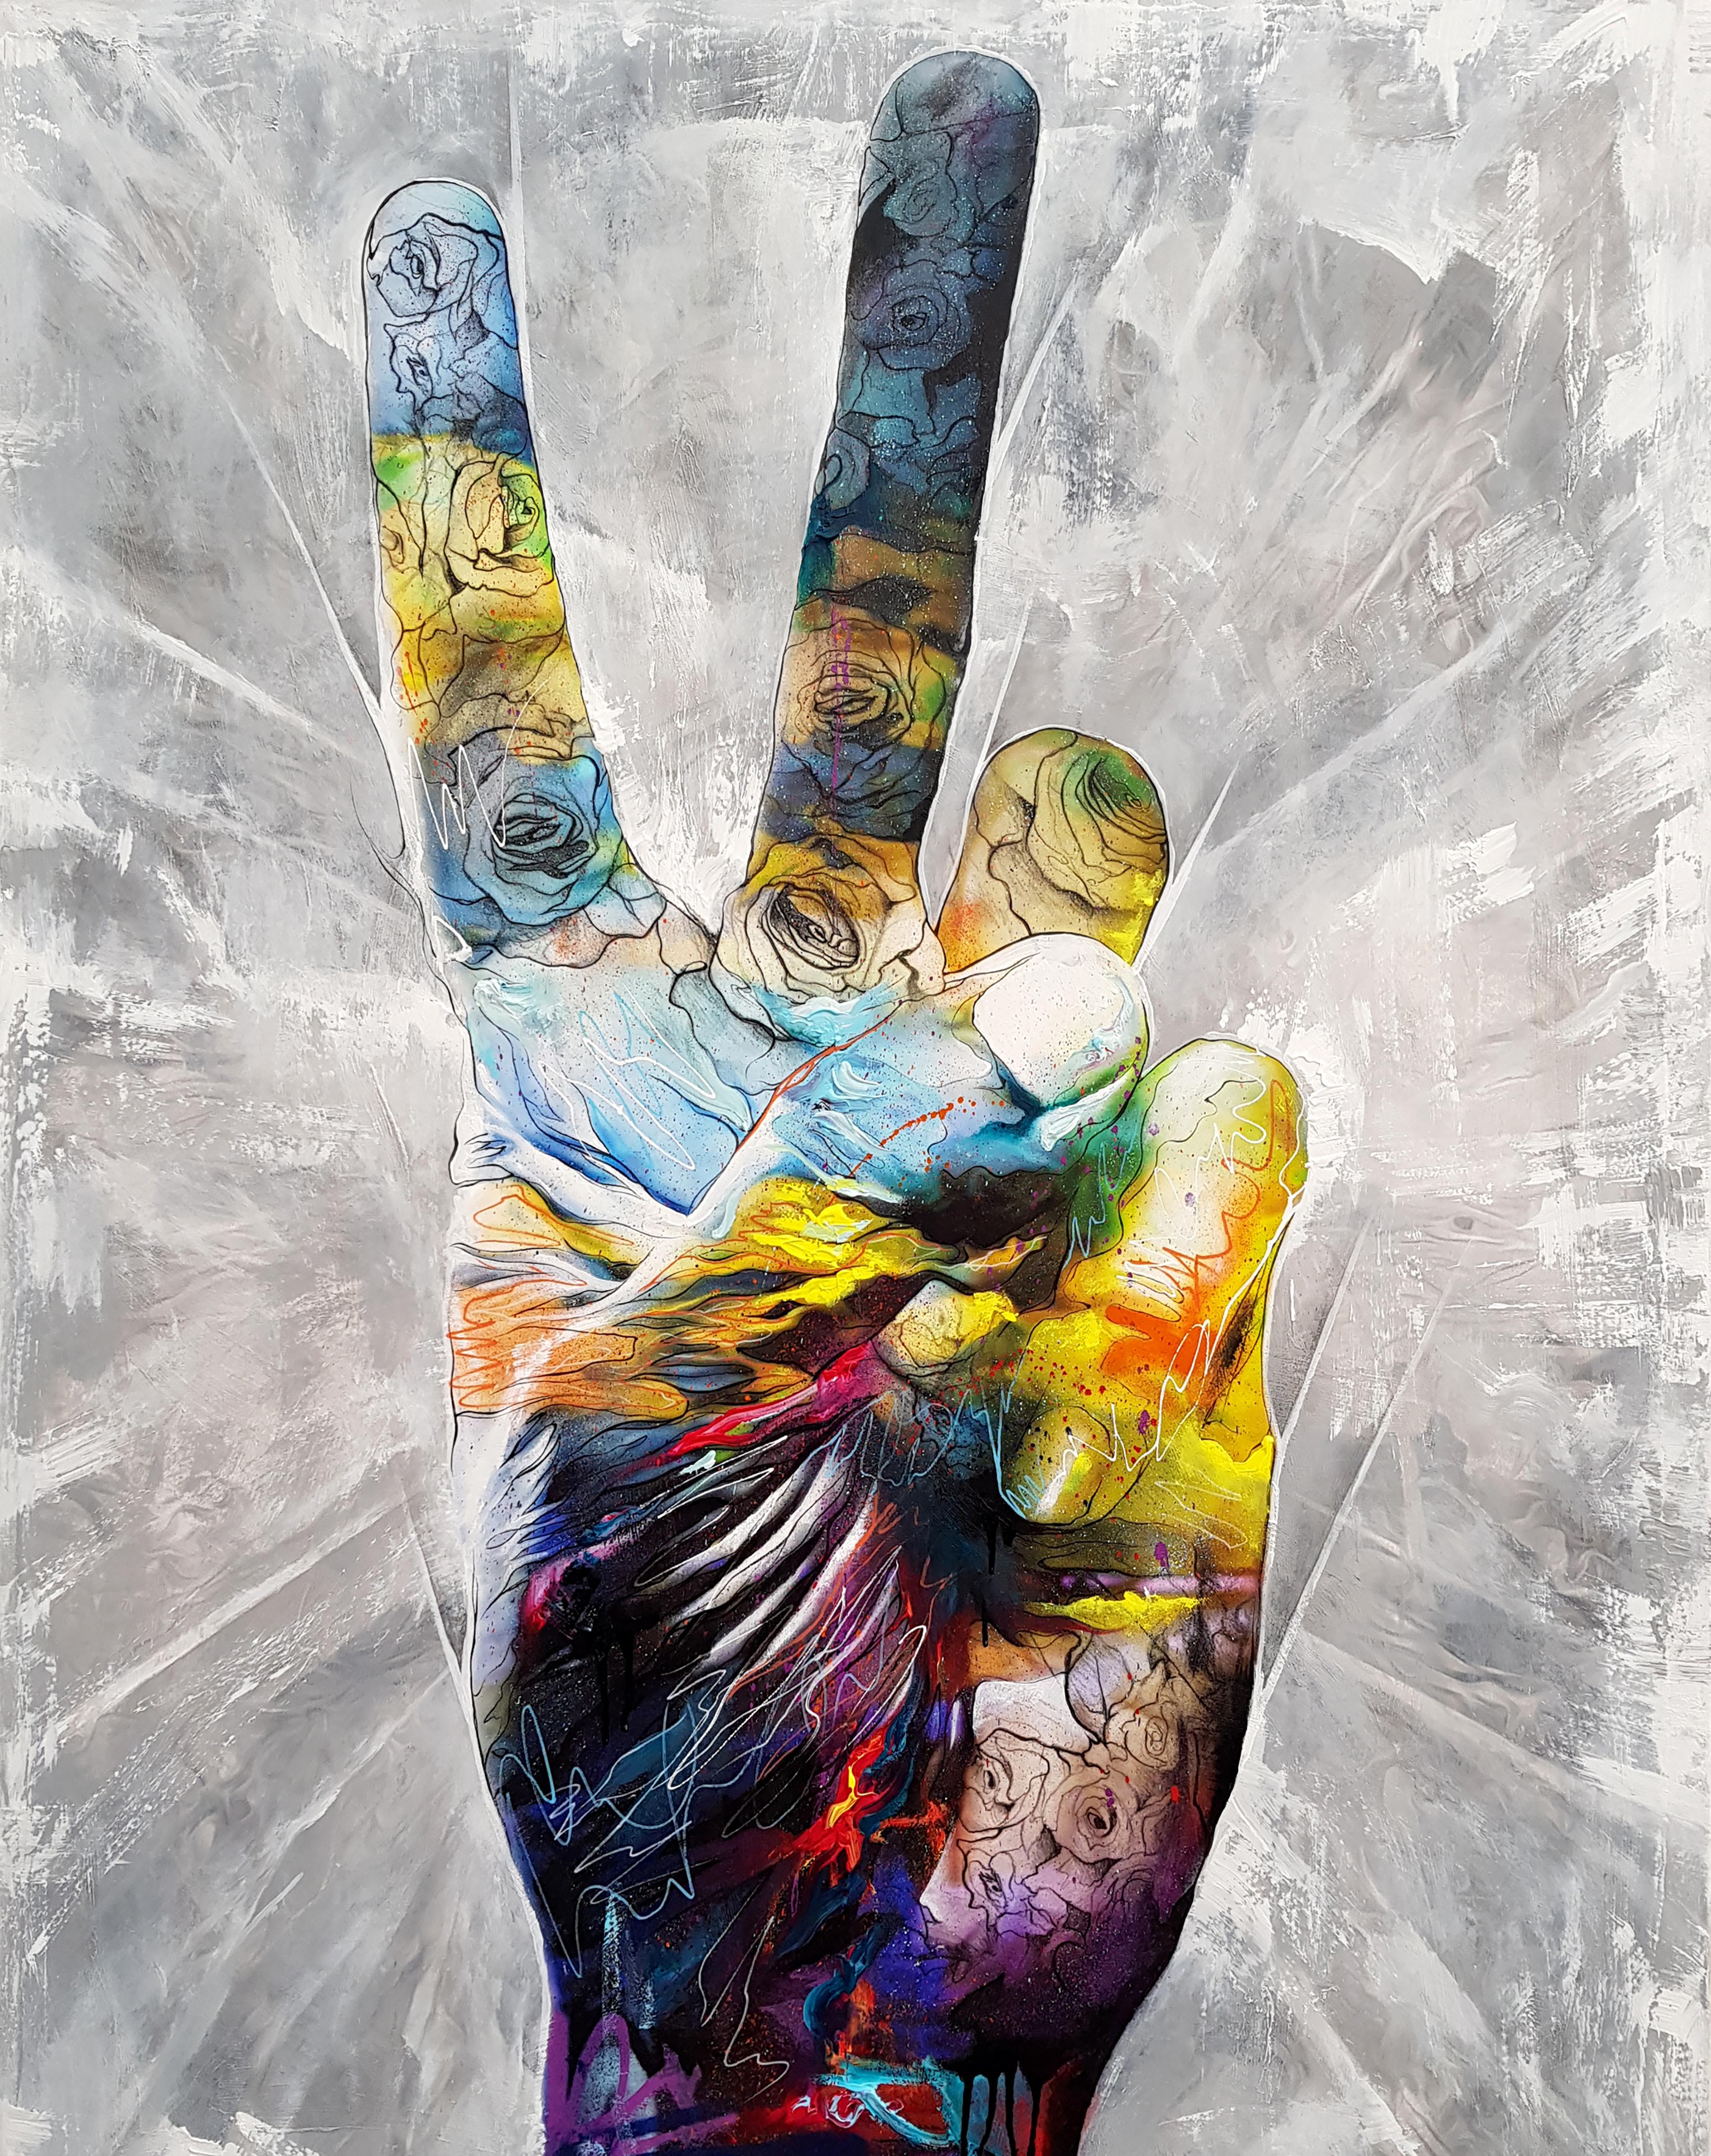 Bring Peace To The Party - 21st Century, Contemporary Painting, Hand, Graffiti 2